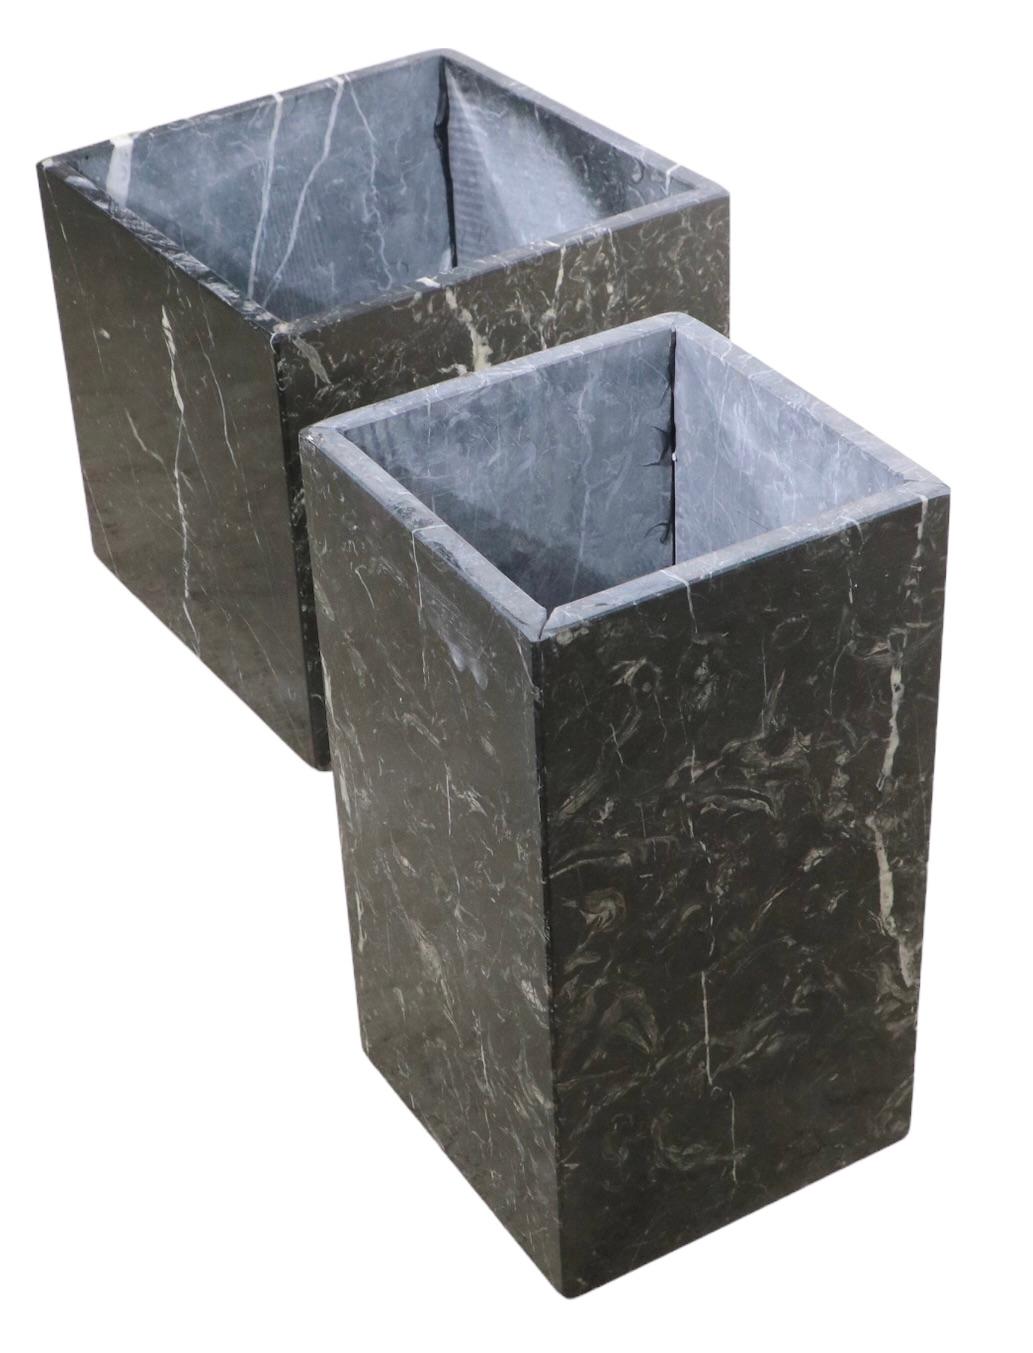 2 Black Marble Pedestal Bases Planters Table Bases c 1960/1970's For Sale 3